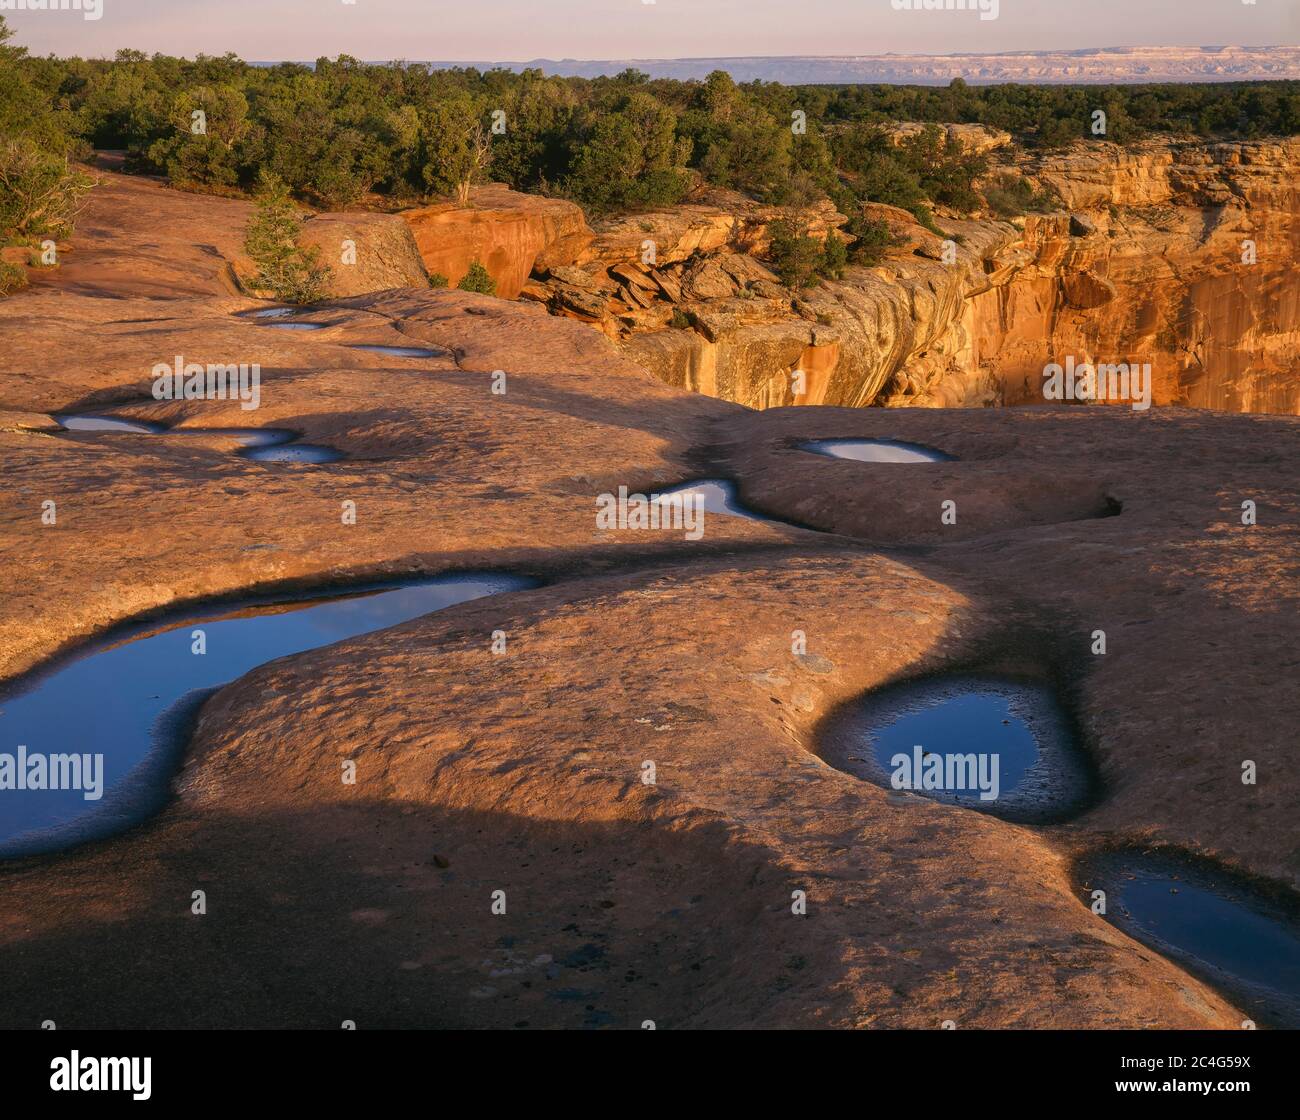 Canyon de Chelly National Monument  AZ / AUG The wind scoured potholes in caprock known as Shinarump Conglomerate form tiny lakes after rain. Stock Photo